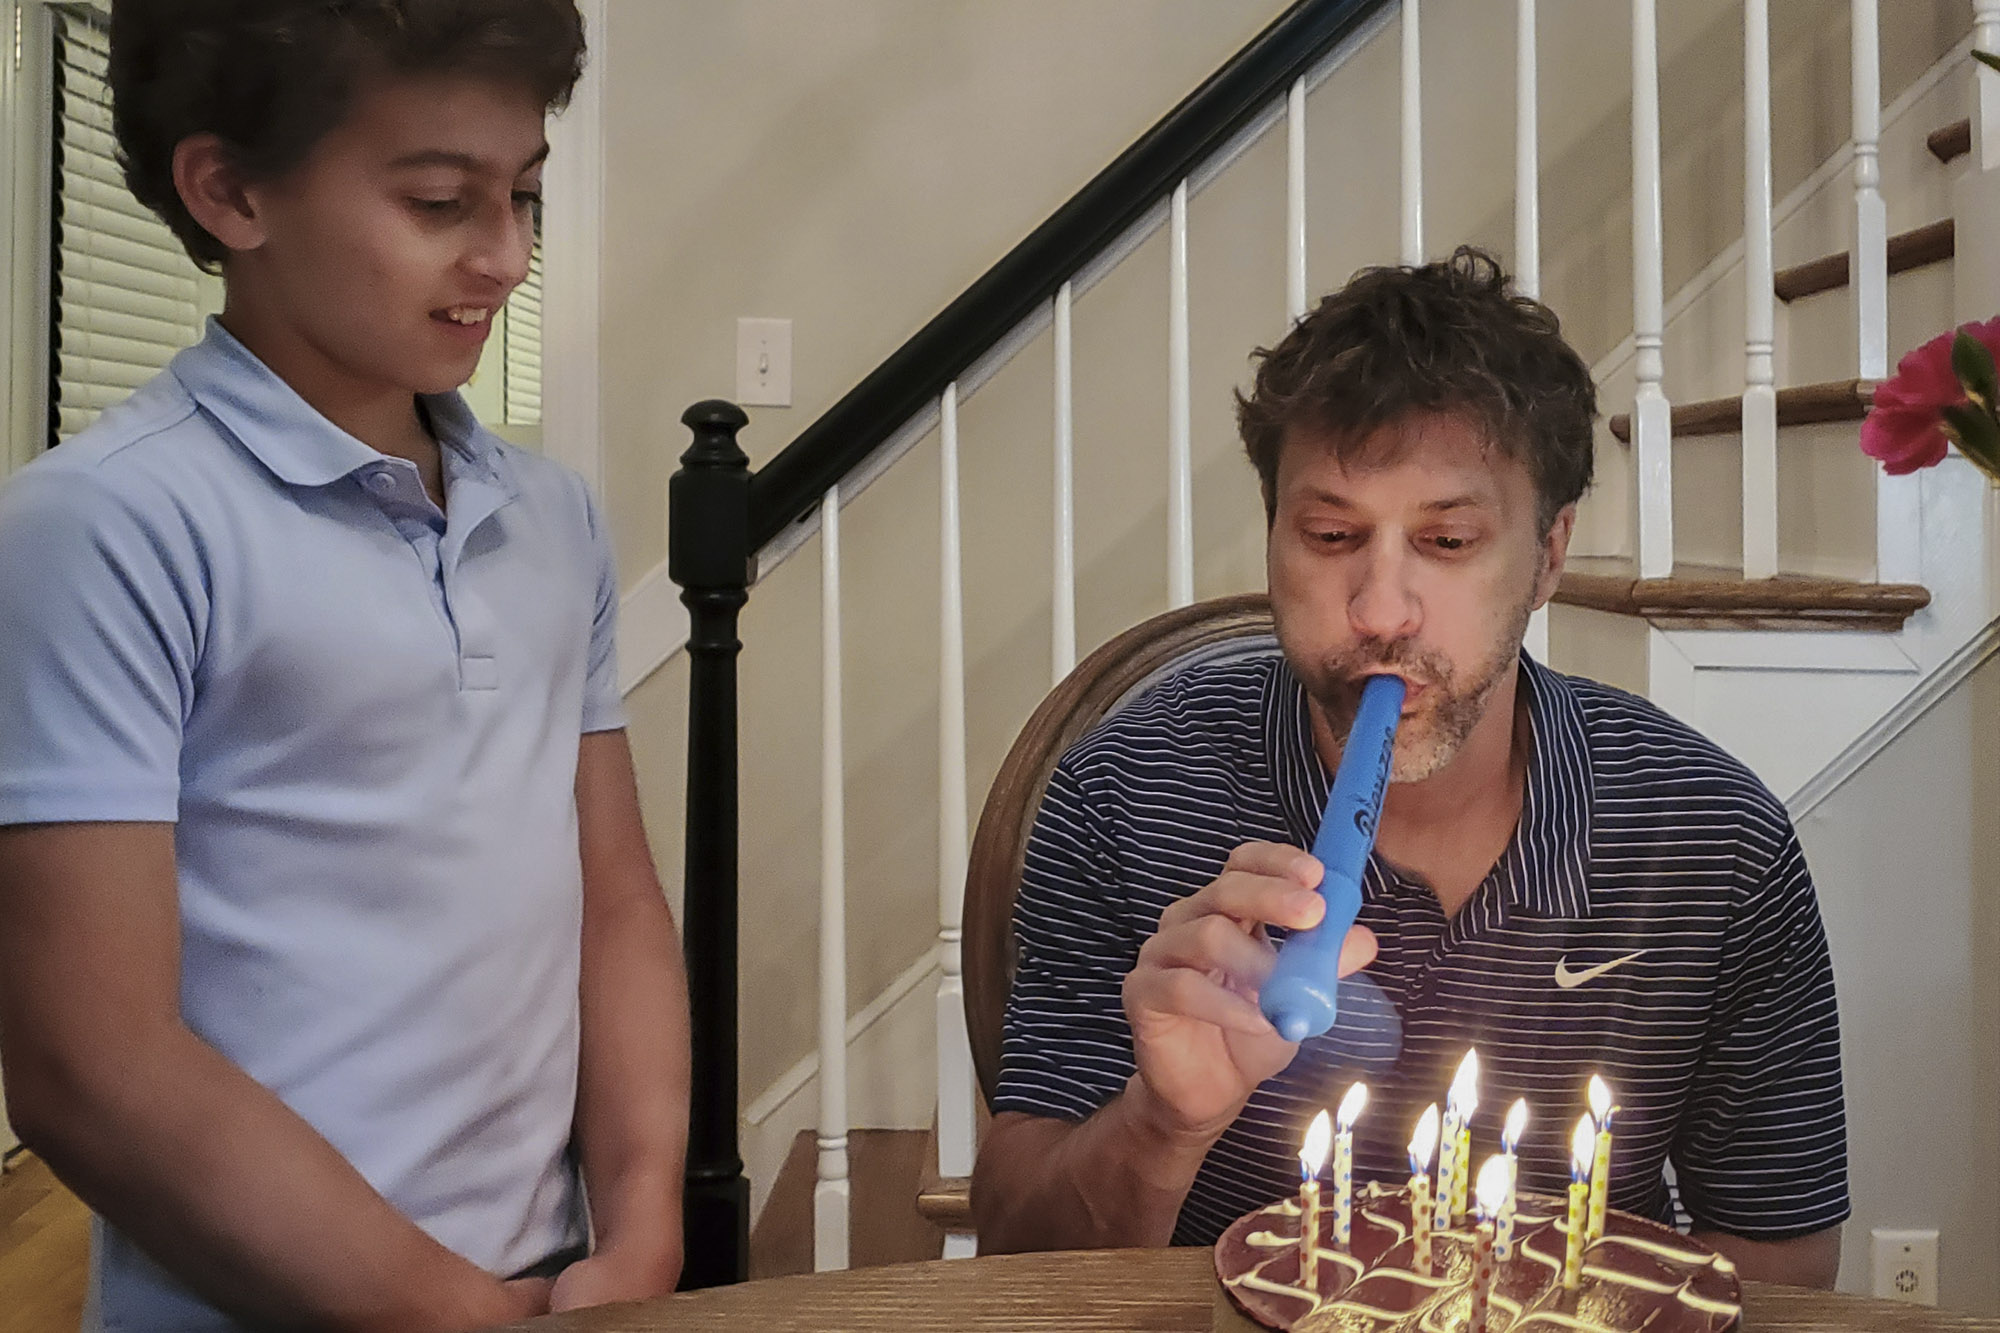 Jake Apelt (left), watches as his dad, Mark (right), uses a Blowzee to blow out candles